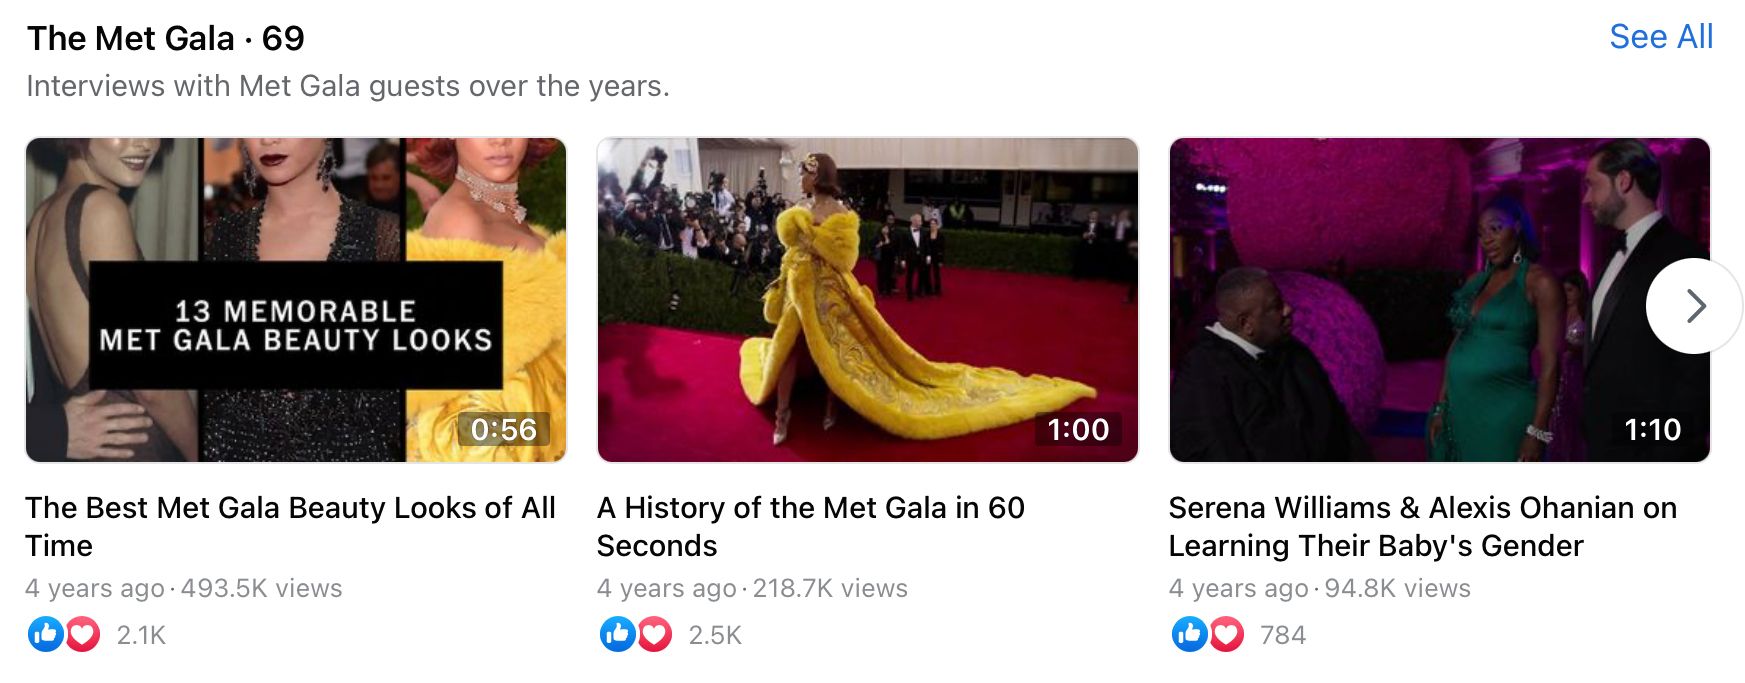 Facebook video playlist for the event called ‘The Met Gala’ by @Vogue